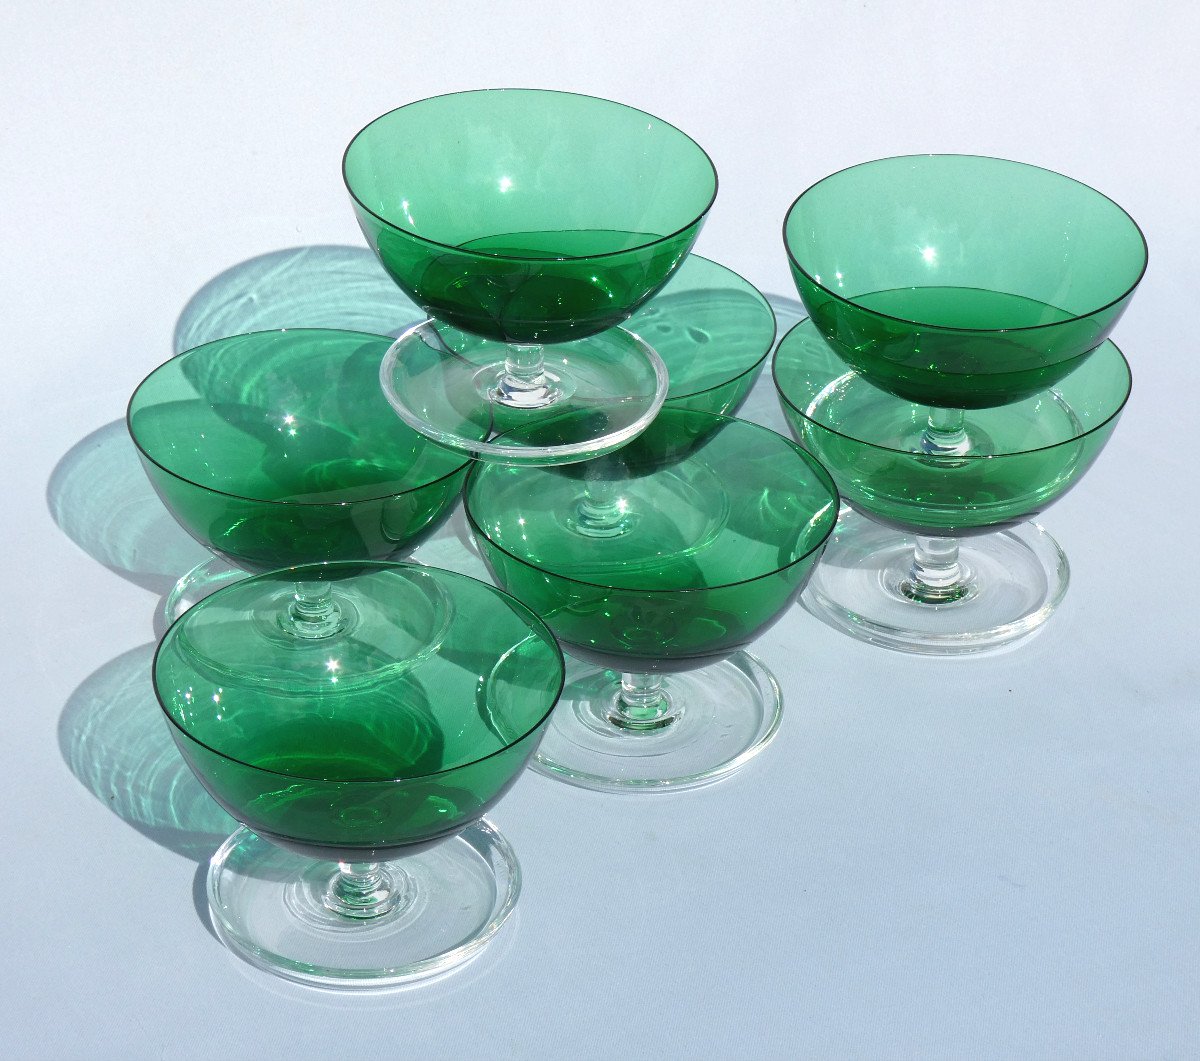 Series Of 7 Fruit / Cherry Ice Cream Cups, Art Deco Crystal, Blue Green, 1900 Glass Bowls-photo-2